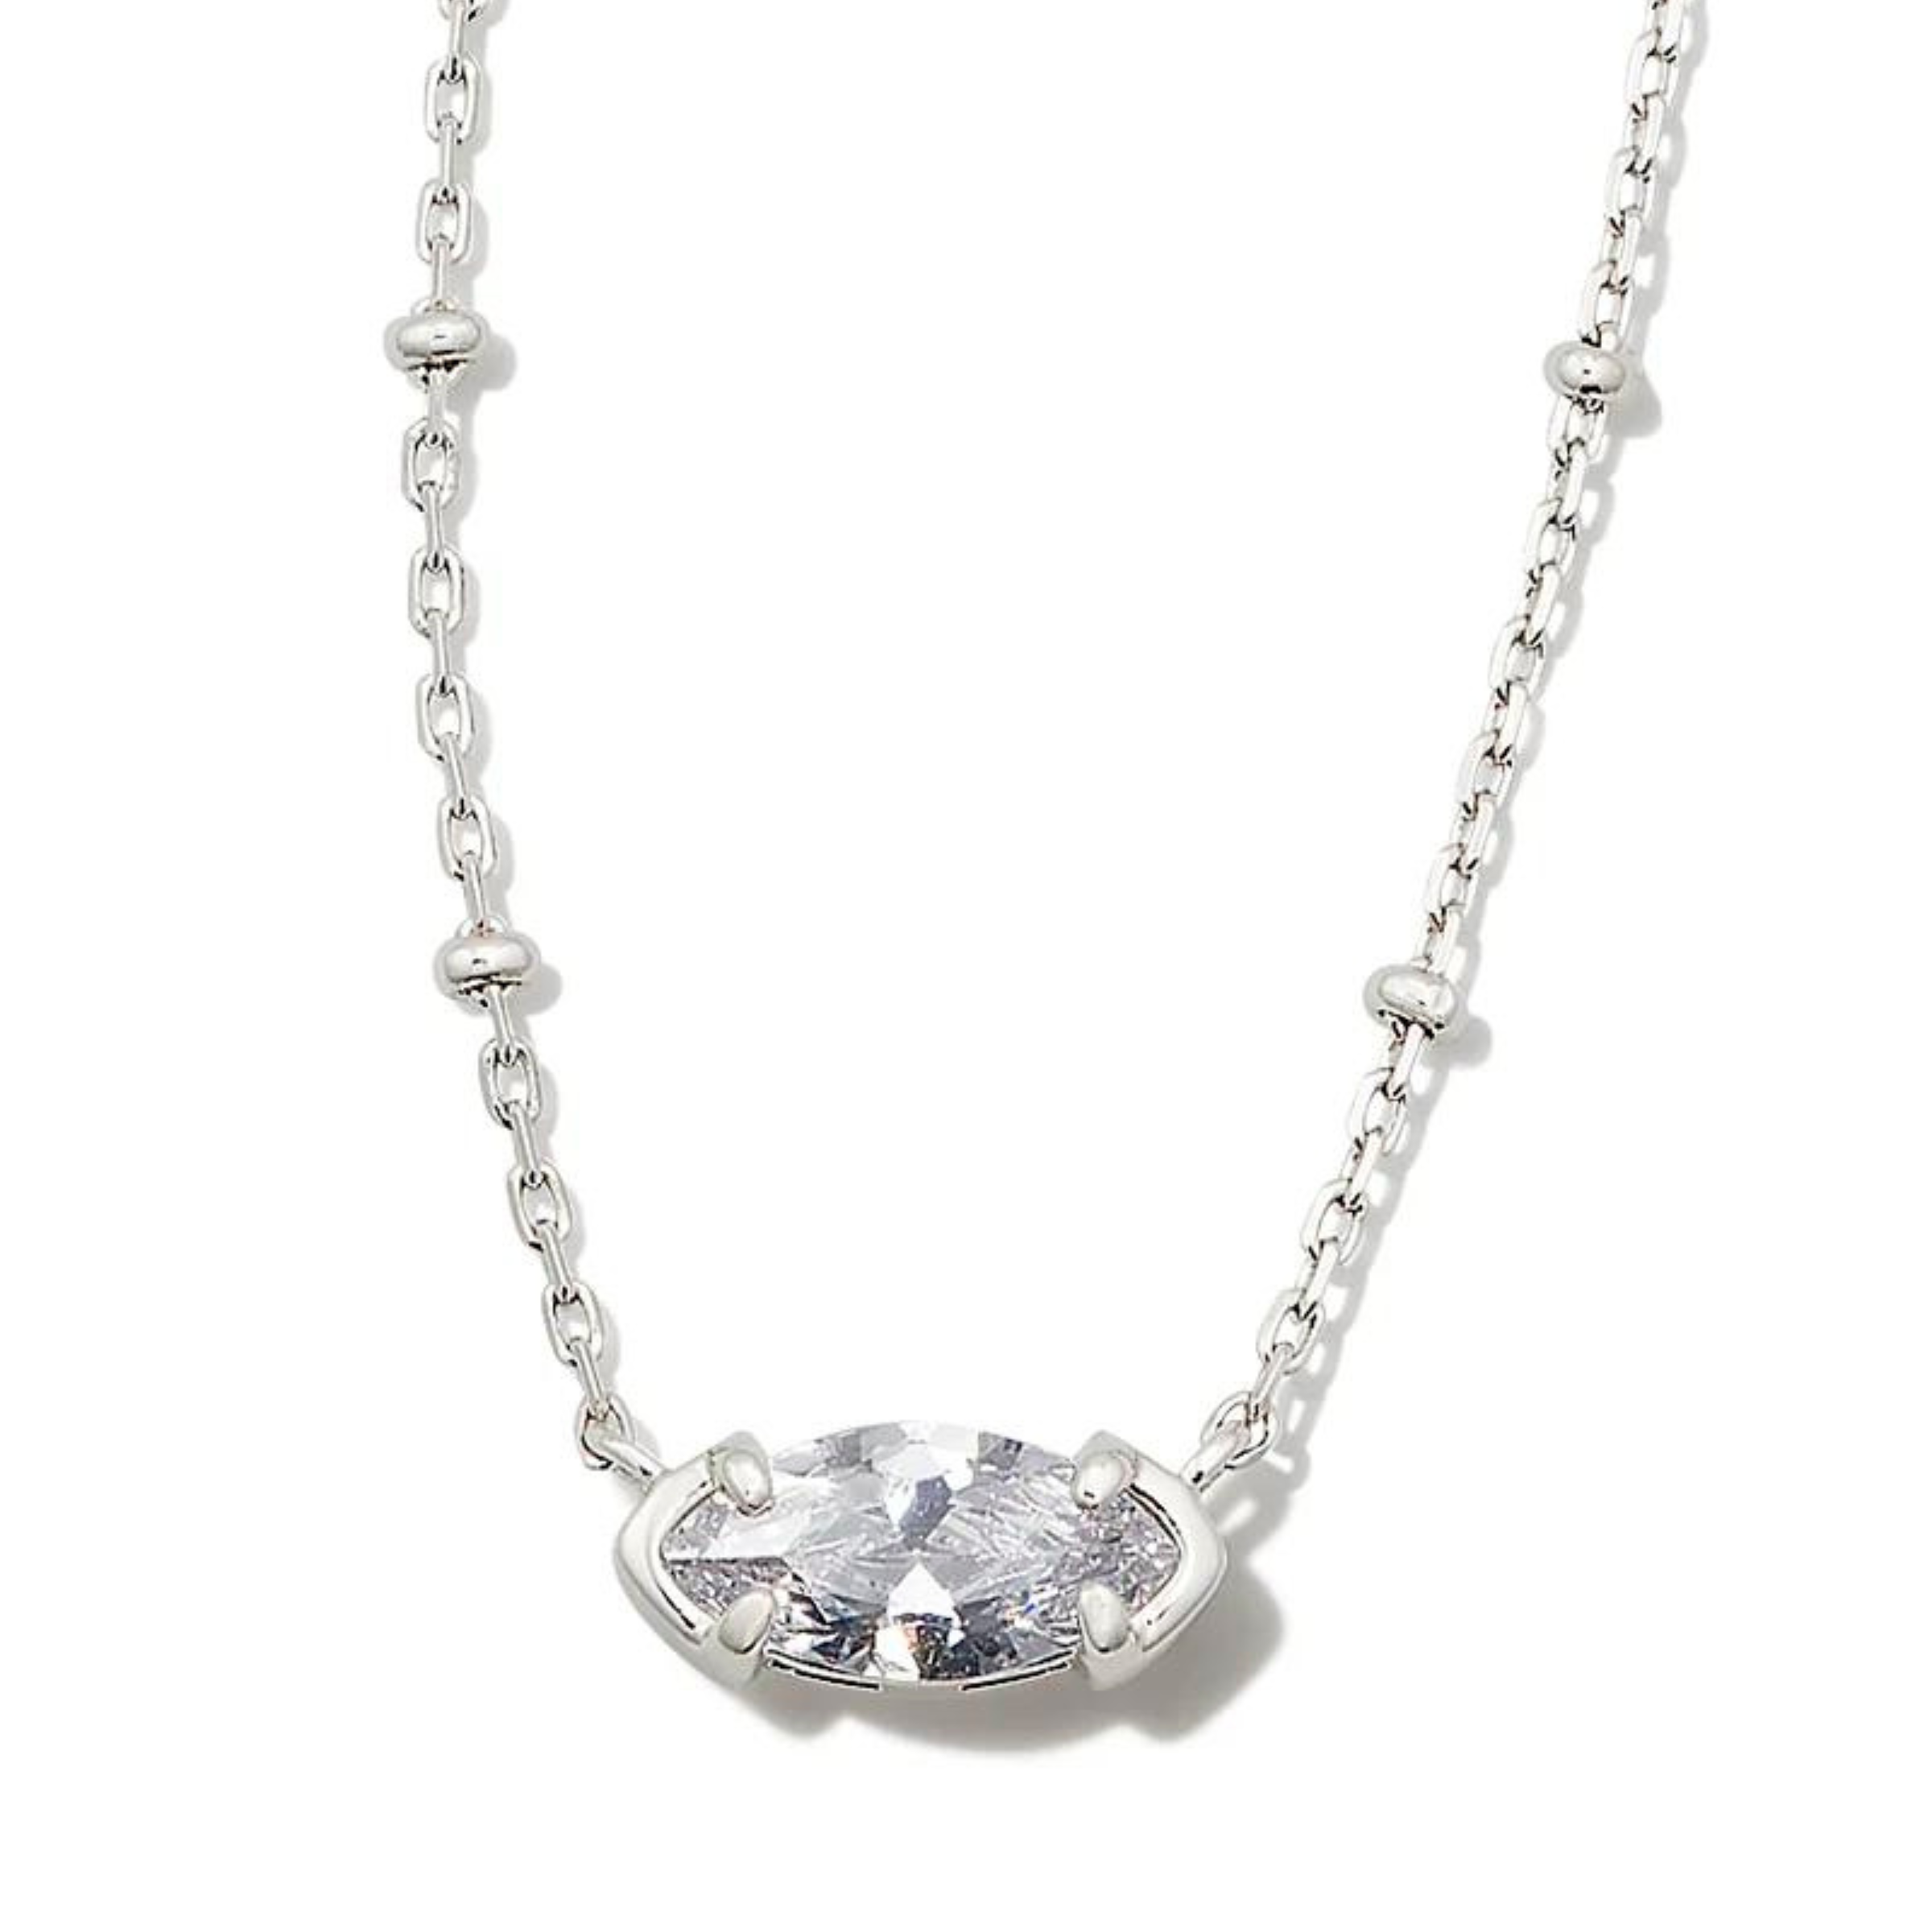 Silver chain necklace with a clear crystal oval pendant. This necklace is pictured on a white background. 